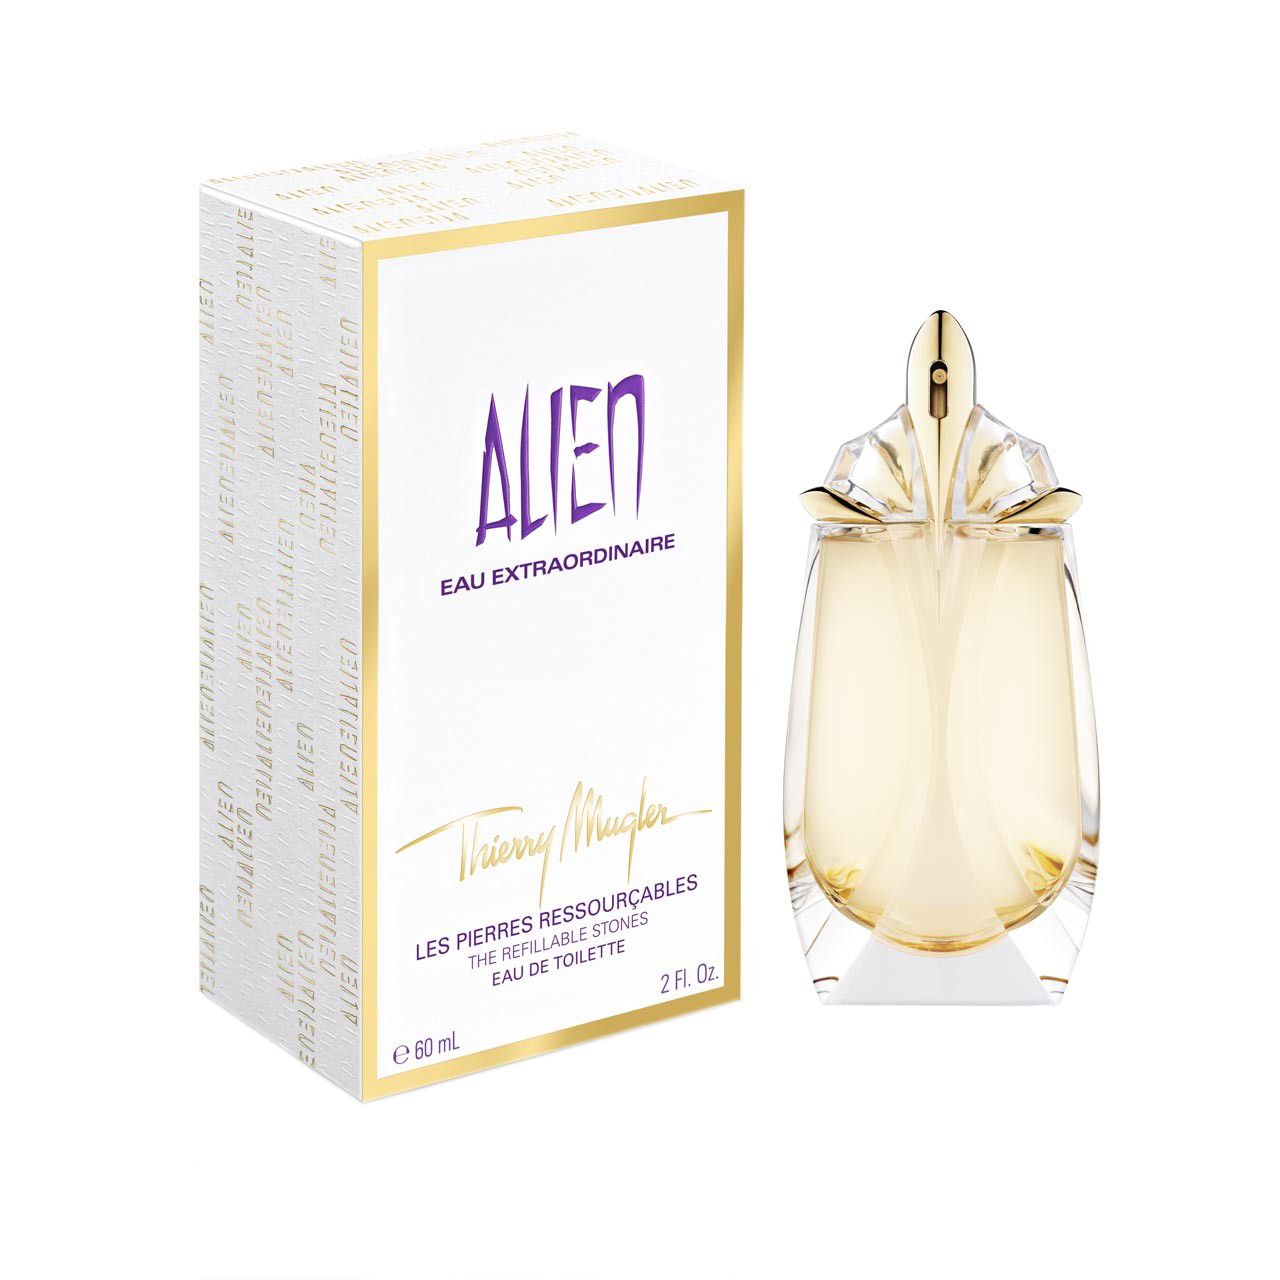 After truly fantastic editions of the Alien collection - Alien Liquer de Parfum 2013 and Alien Essence Absolue from 2012 Thierry Mugler is preparing a new fragrant surprise and tingles the imagination with the latest version of the original fragrance named Thierry Mugler Alien Eau Extraordinaire! The latest fragrance that we expect on the market soon starts a new chapter in history of Thierry Mugler Alien fragrance. 

Uniqueness of this fragrance is reflected in delicate floral notes with characteristic freshness and it exudes more optimism and positive messages. Alien Eau Extraordinaire is a positive fragrant expression of sunny and glittery essence. 


Top notes of the composition provide an irresistible blend of Tunisian neroli combined with tea and bergamot. The heart of the composition adds fresh, elegant and gentle exotic Tiare flower note warmed with deep, warm and sensual aromas of white amber. The new perfume of Thierry Mugler collection was created to transfer the feeling of tranquility and happiness to all women. 


The new fragrance of Alien collection will be launched accompanied with natural make up. Alien Eau Extraordinaire arrives as 60ml Eau de Toilette. Flacon of the new fragrance follows the style of Thierry Mugler collection, resembling a gem decorated with golden details. Body of the bottle is much curvier than its antecedents, has massive bottom and is transparent, which serves to transfer freshness and gentleness of the composition. Pale beige shade of the liquid is accentuated with icy beige details on the flacon. Alien Eau Extraordinaire was launched in 2014. Alien Eau Extraordinaire was created by Dominique Ropion and Veronique Nyberg.